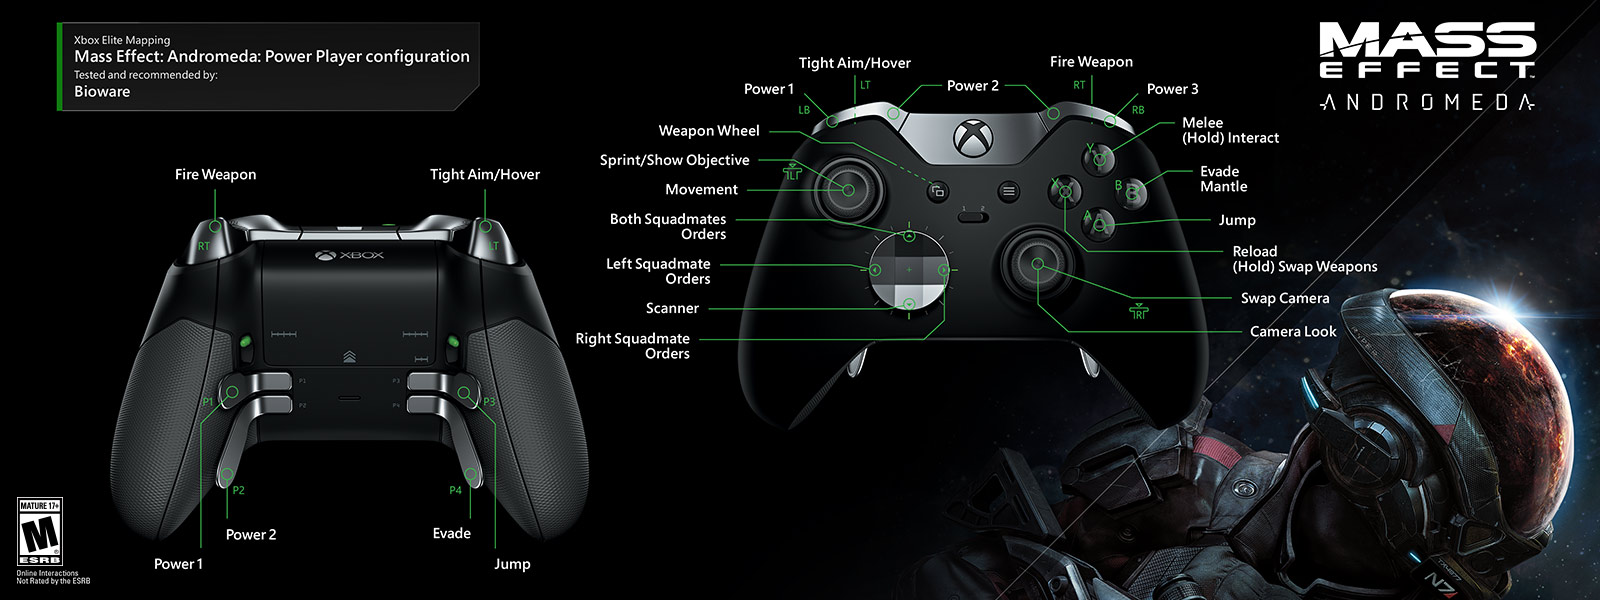 best xbox controller with paddles